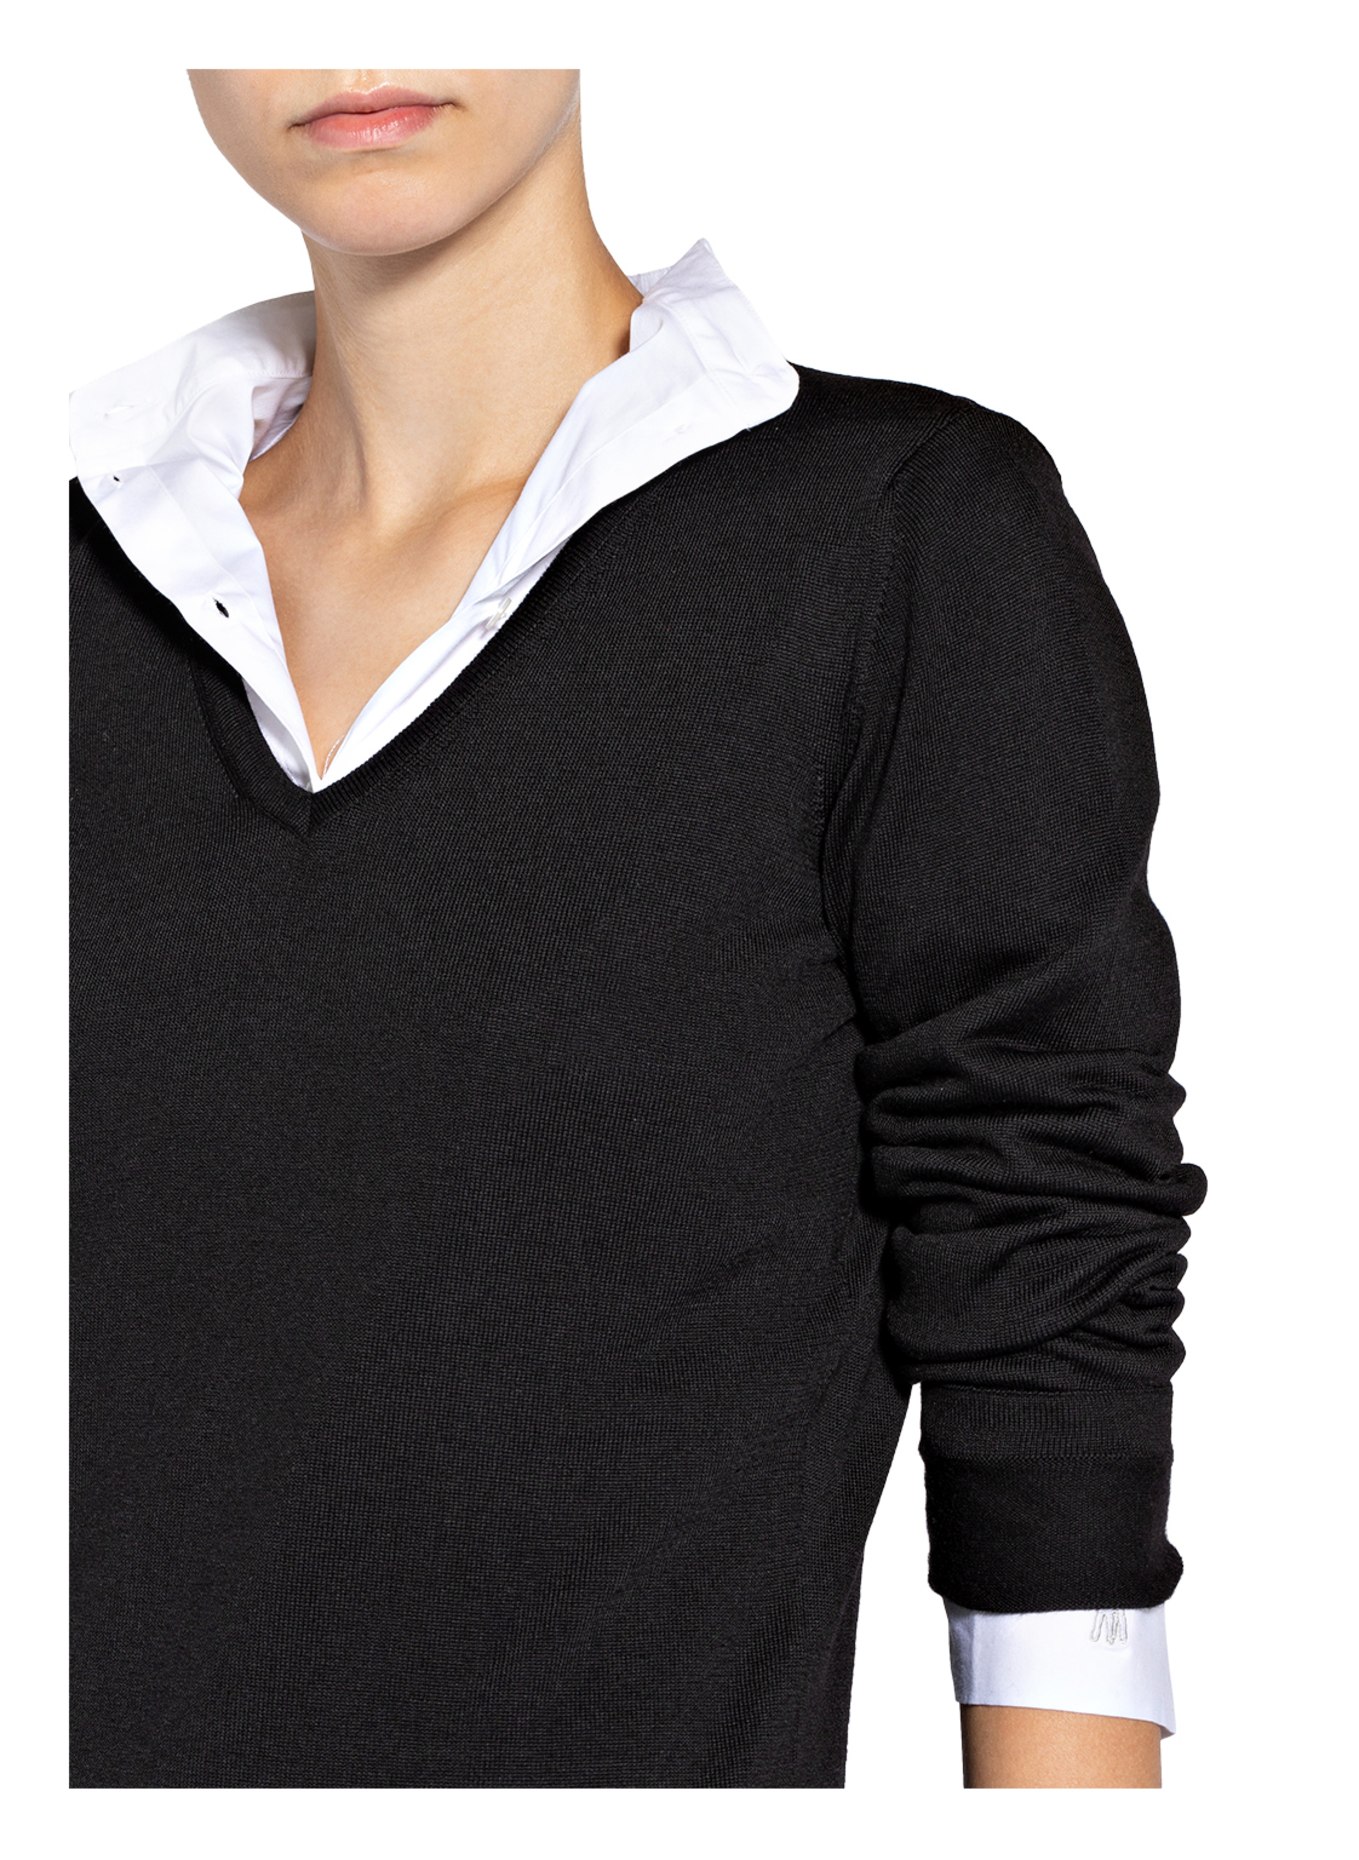 MAERZ MUENCHEN Sweater, Color: BLACK (Image 4)